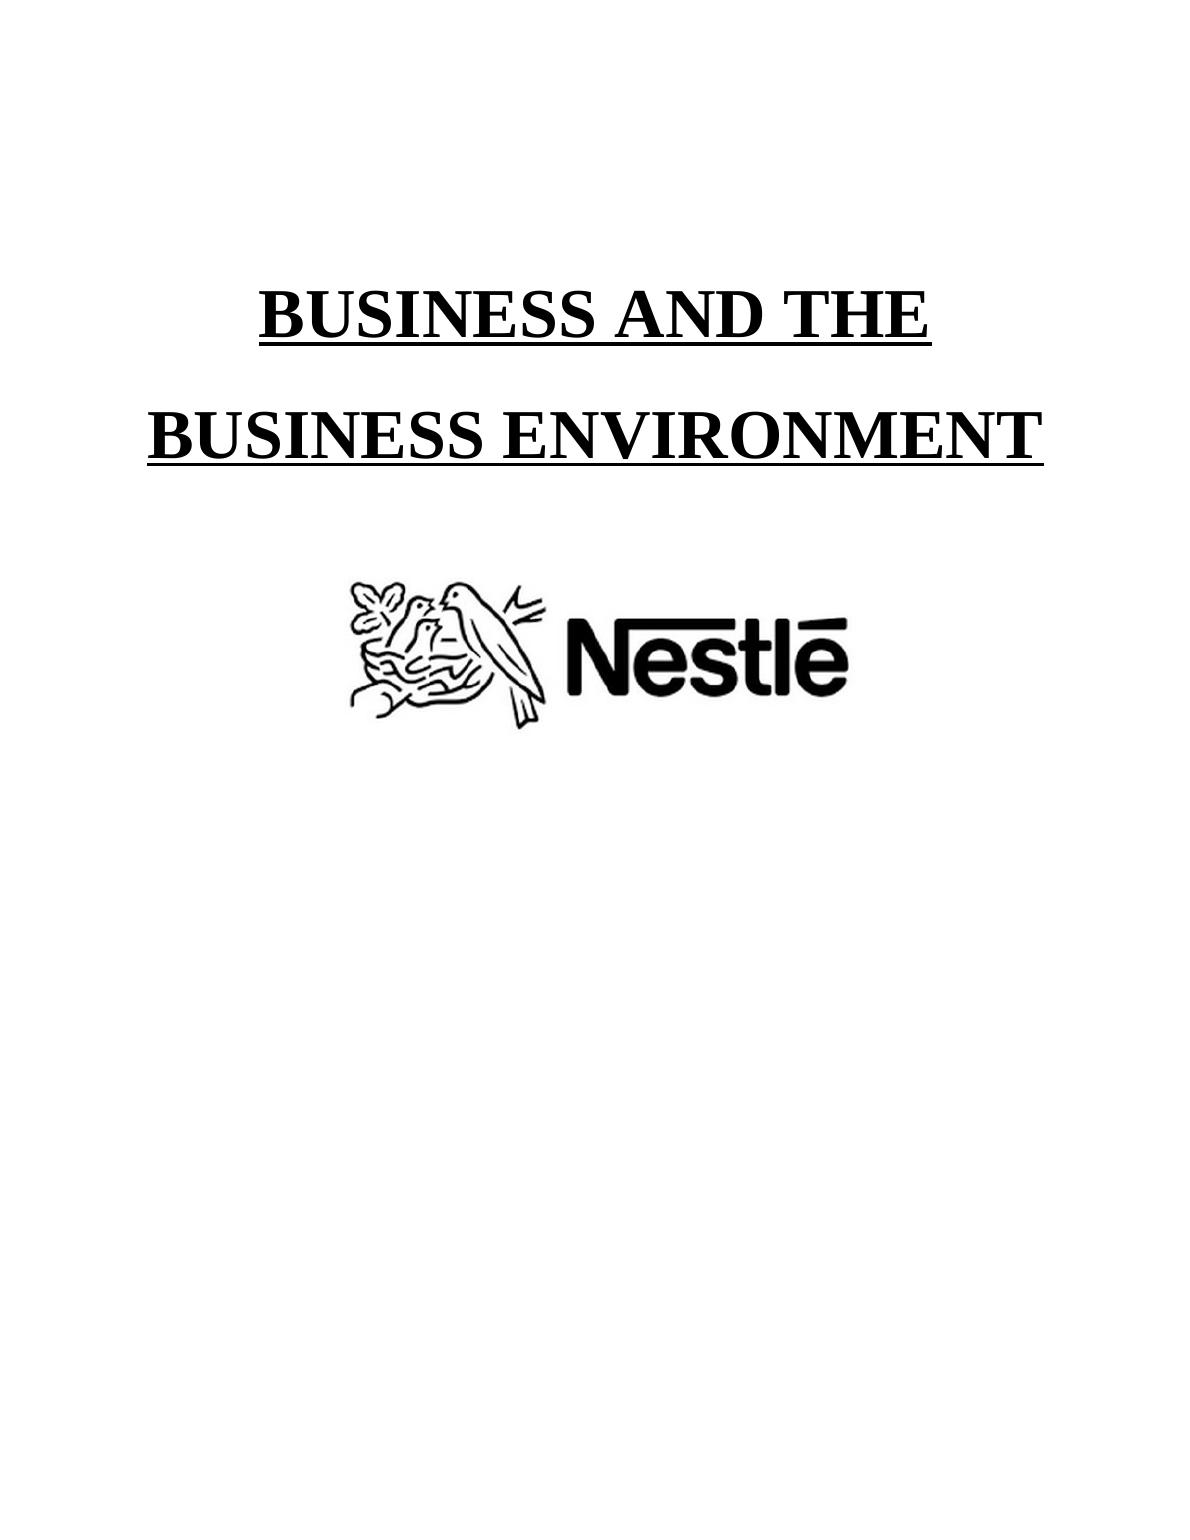 The Business Environment of Nestle_1